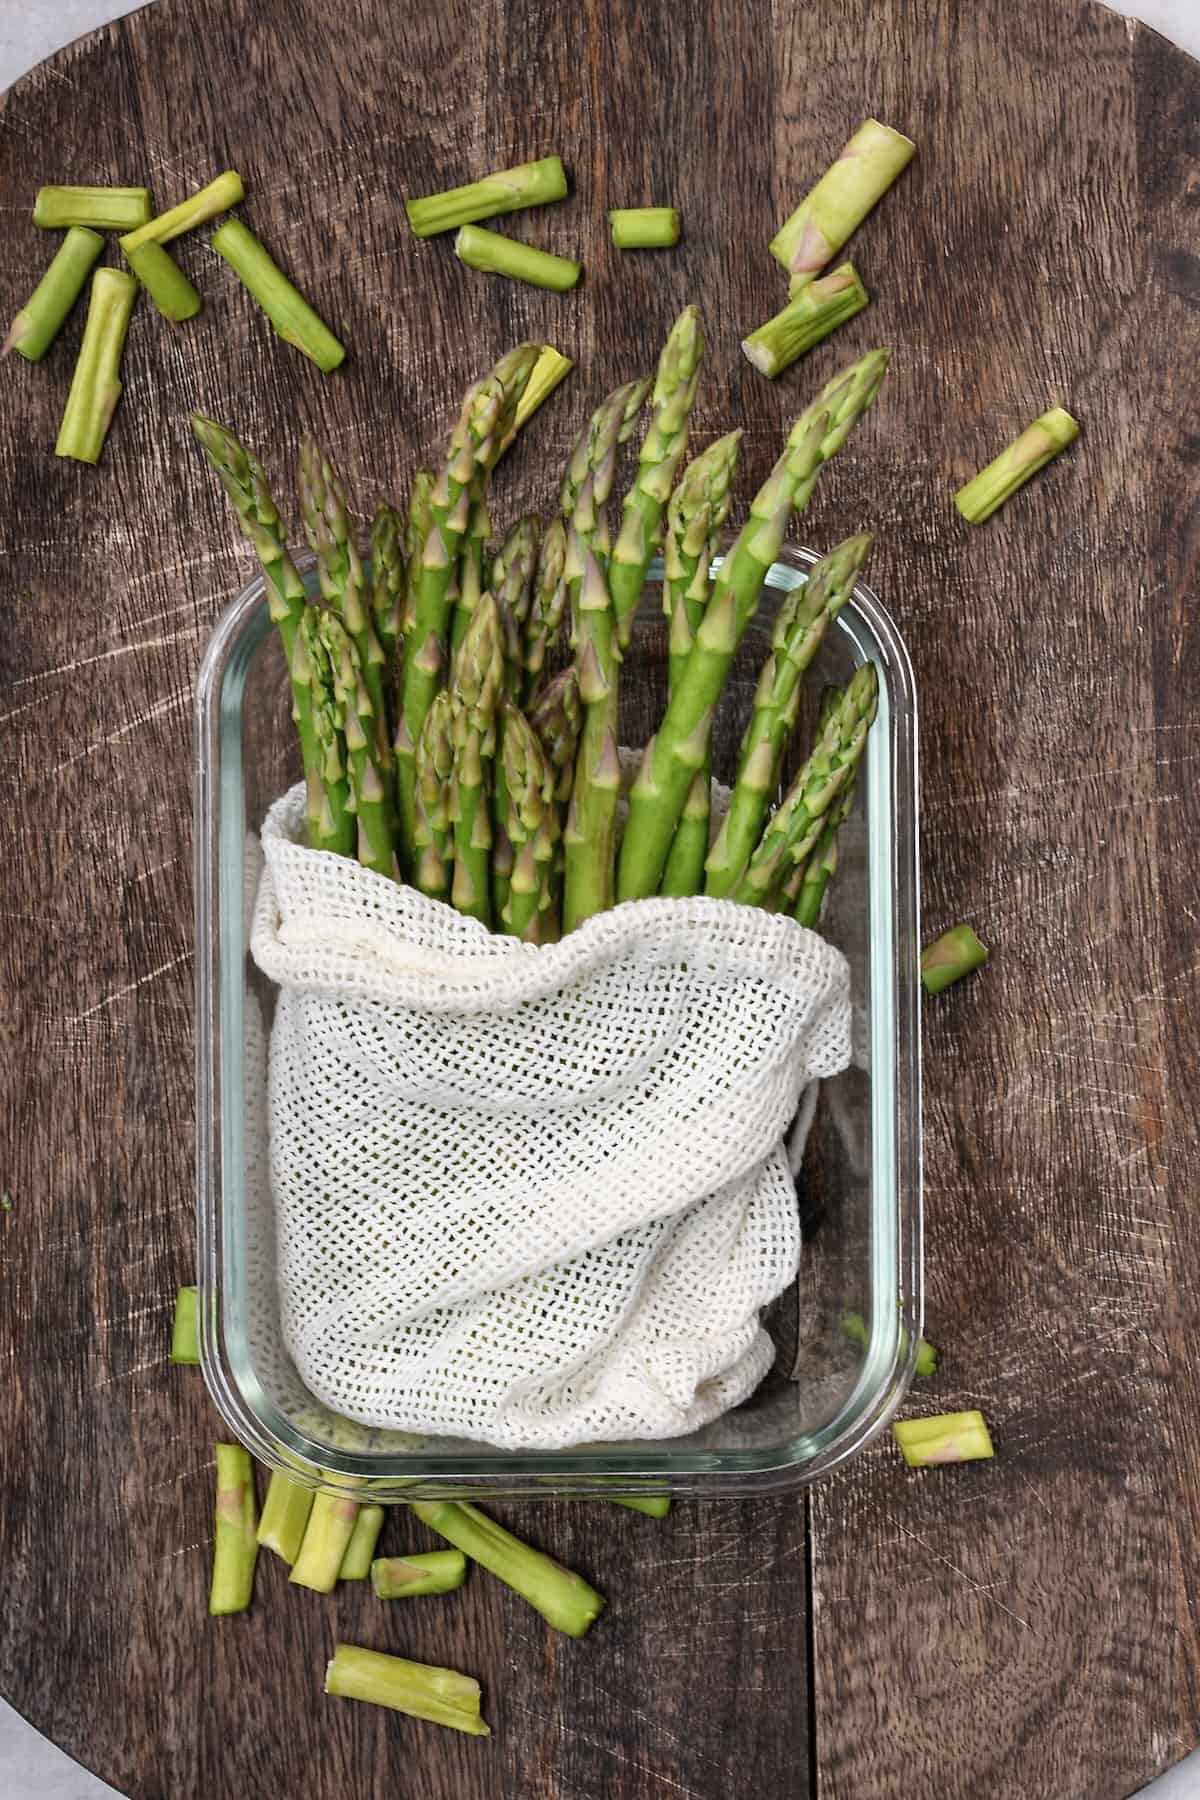 Storing asparagus in a cotton bag